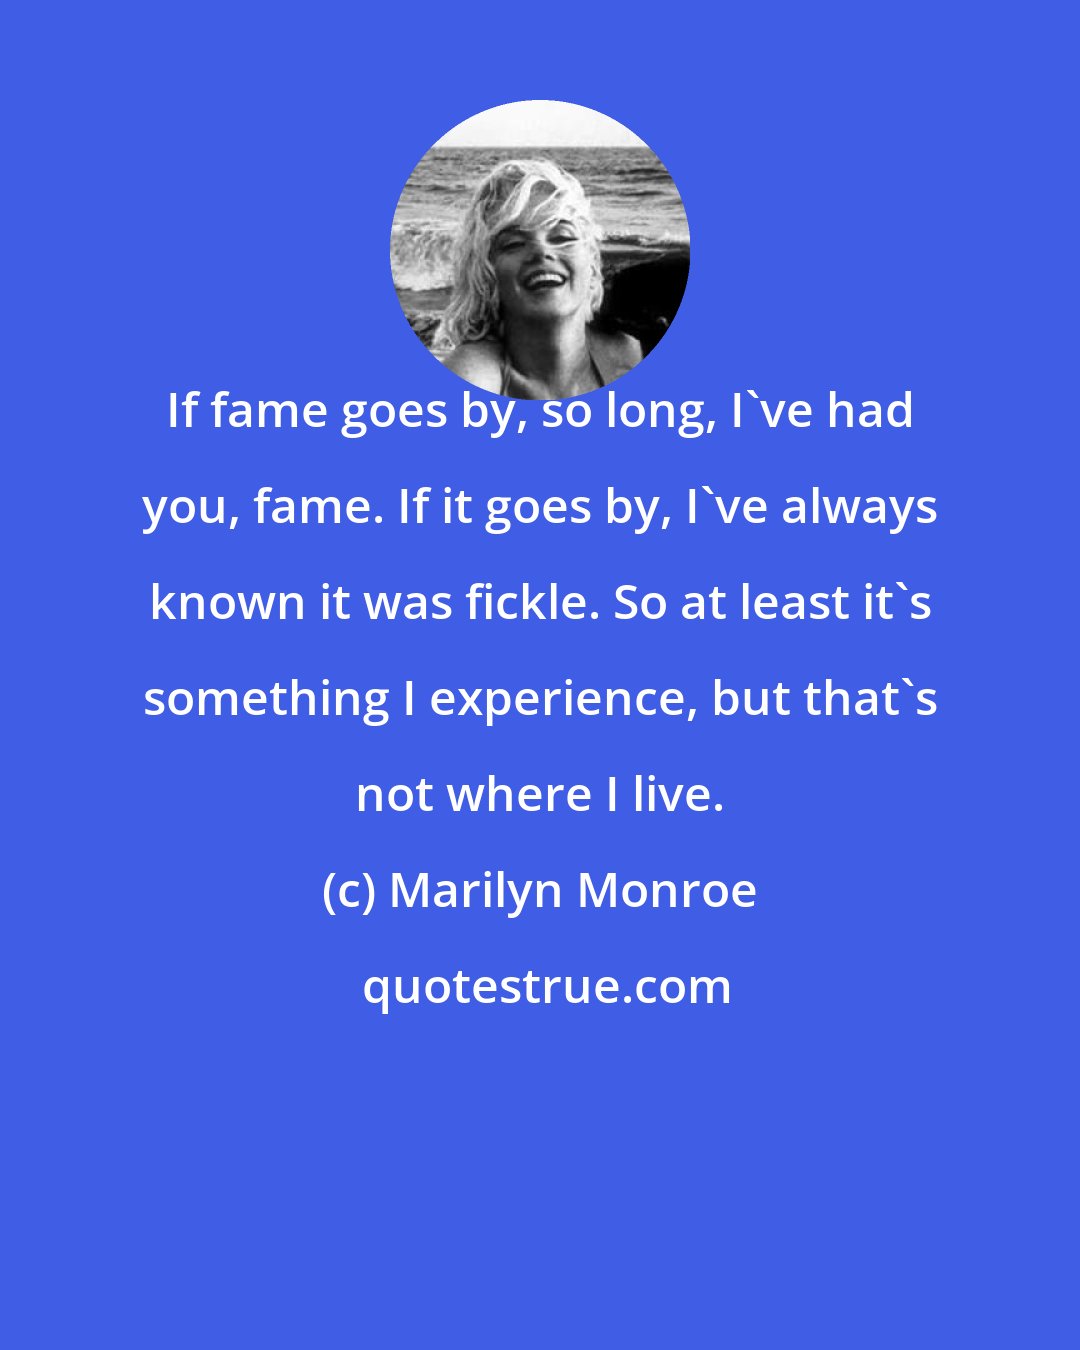 Marilyn Monroe: If fame goes by, so long, I've had you, fame. If it goes by, I've always known it was fickle. So at least it's something I experience, but that's not where I live.